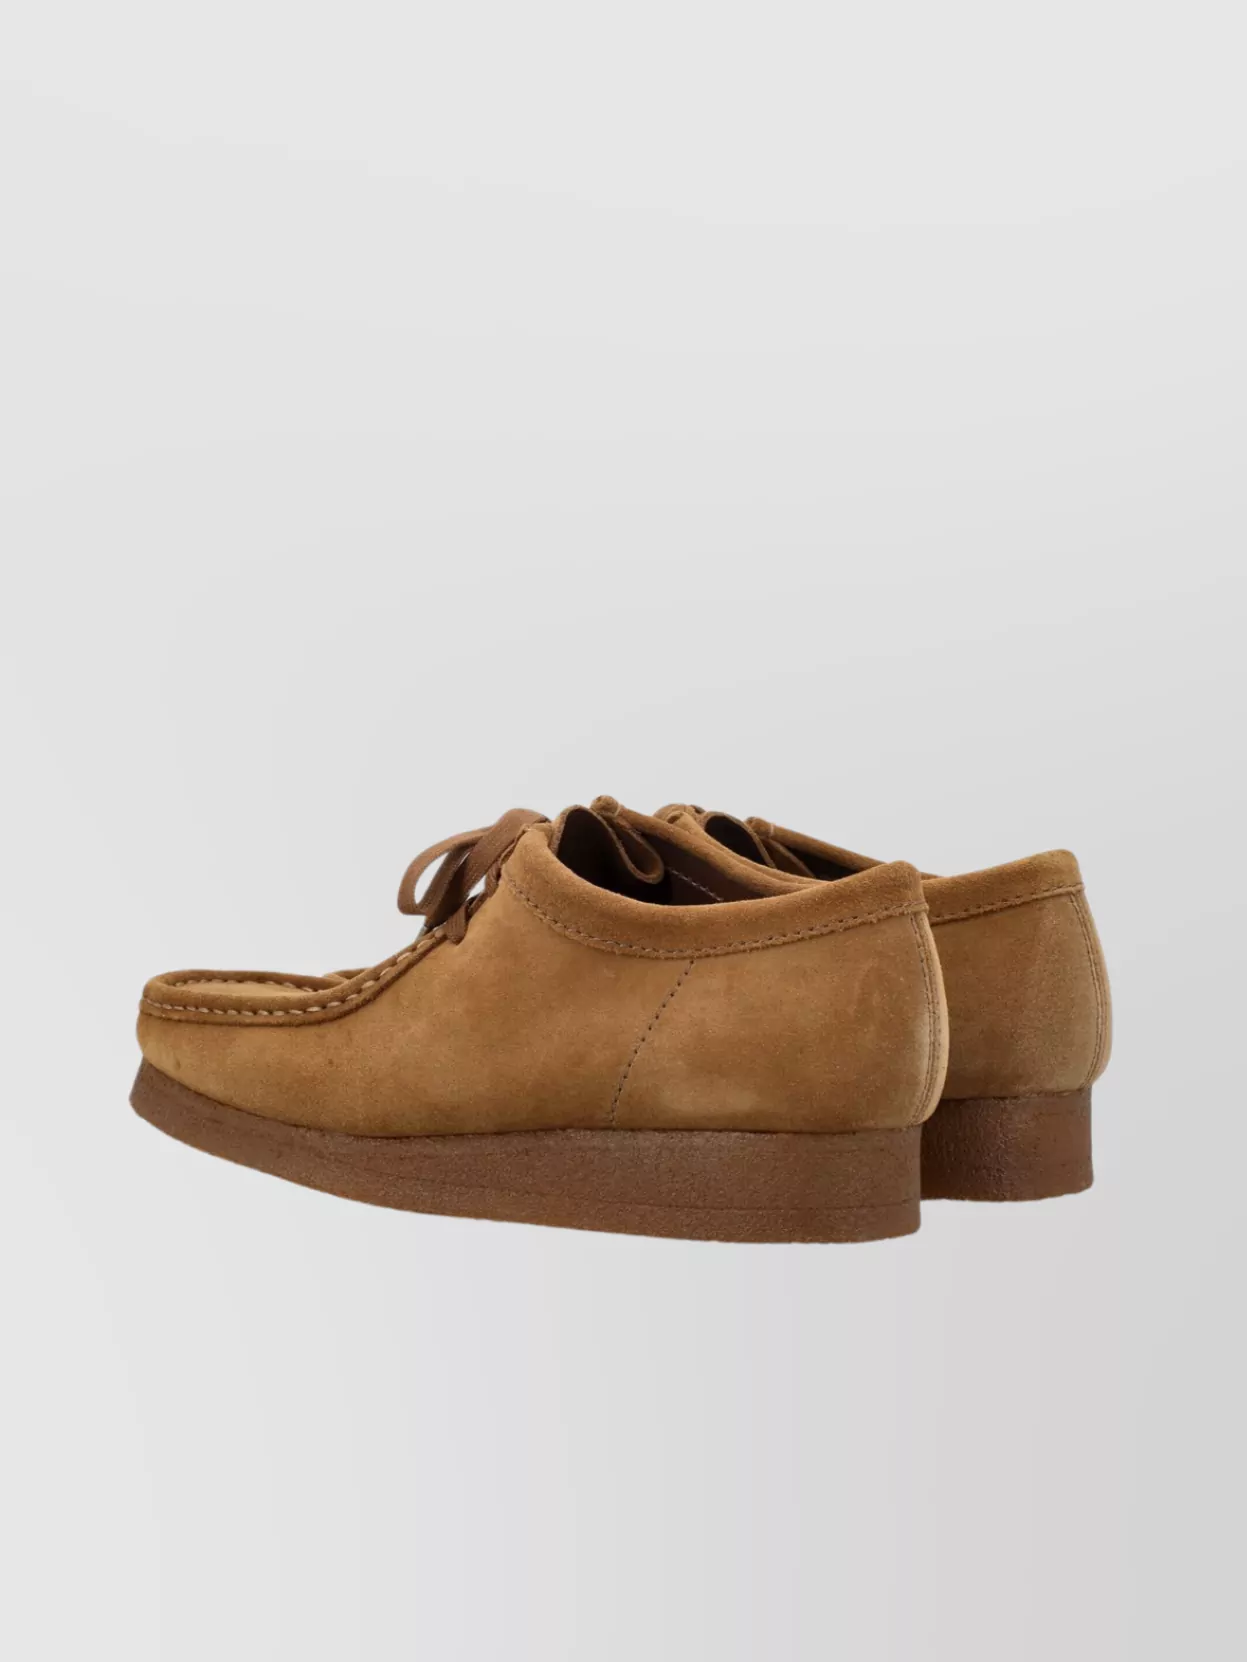 Clarks Crepe Sole Moc Toe Brogues In Brown